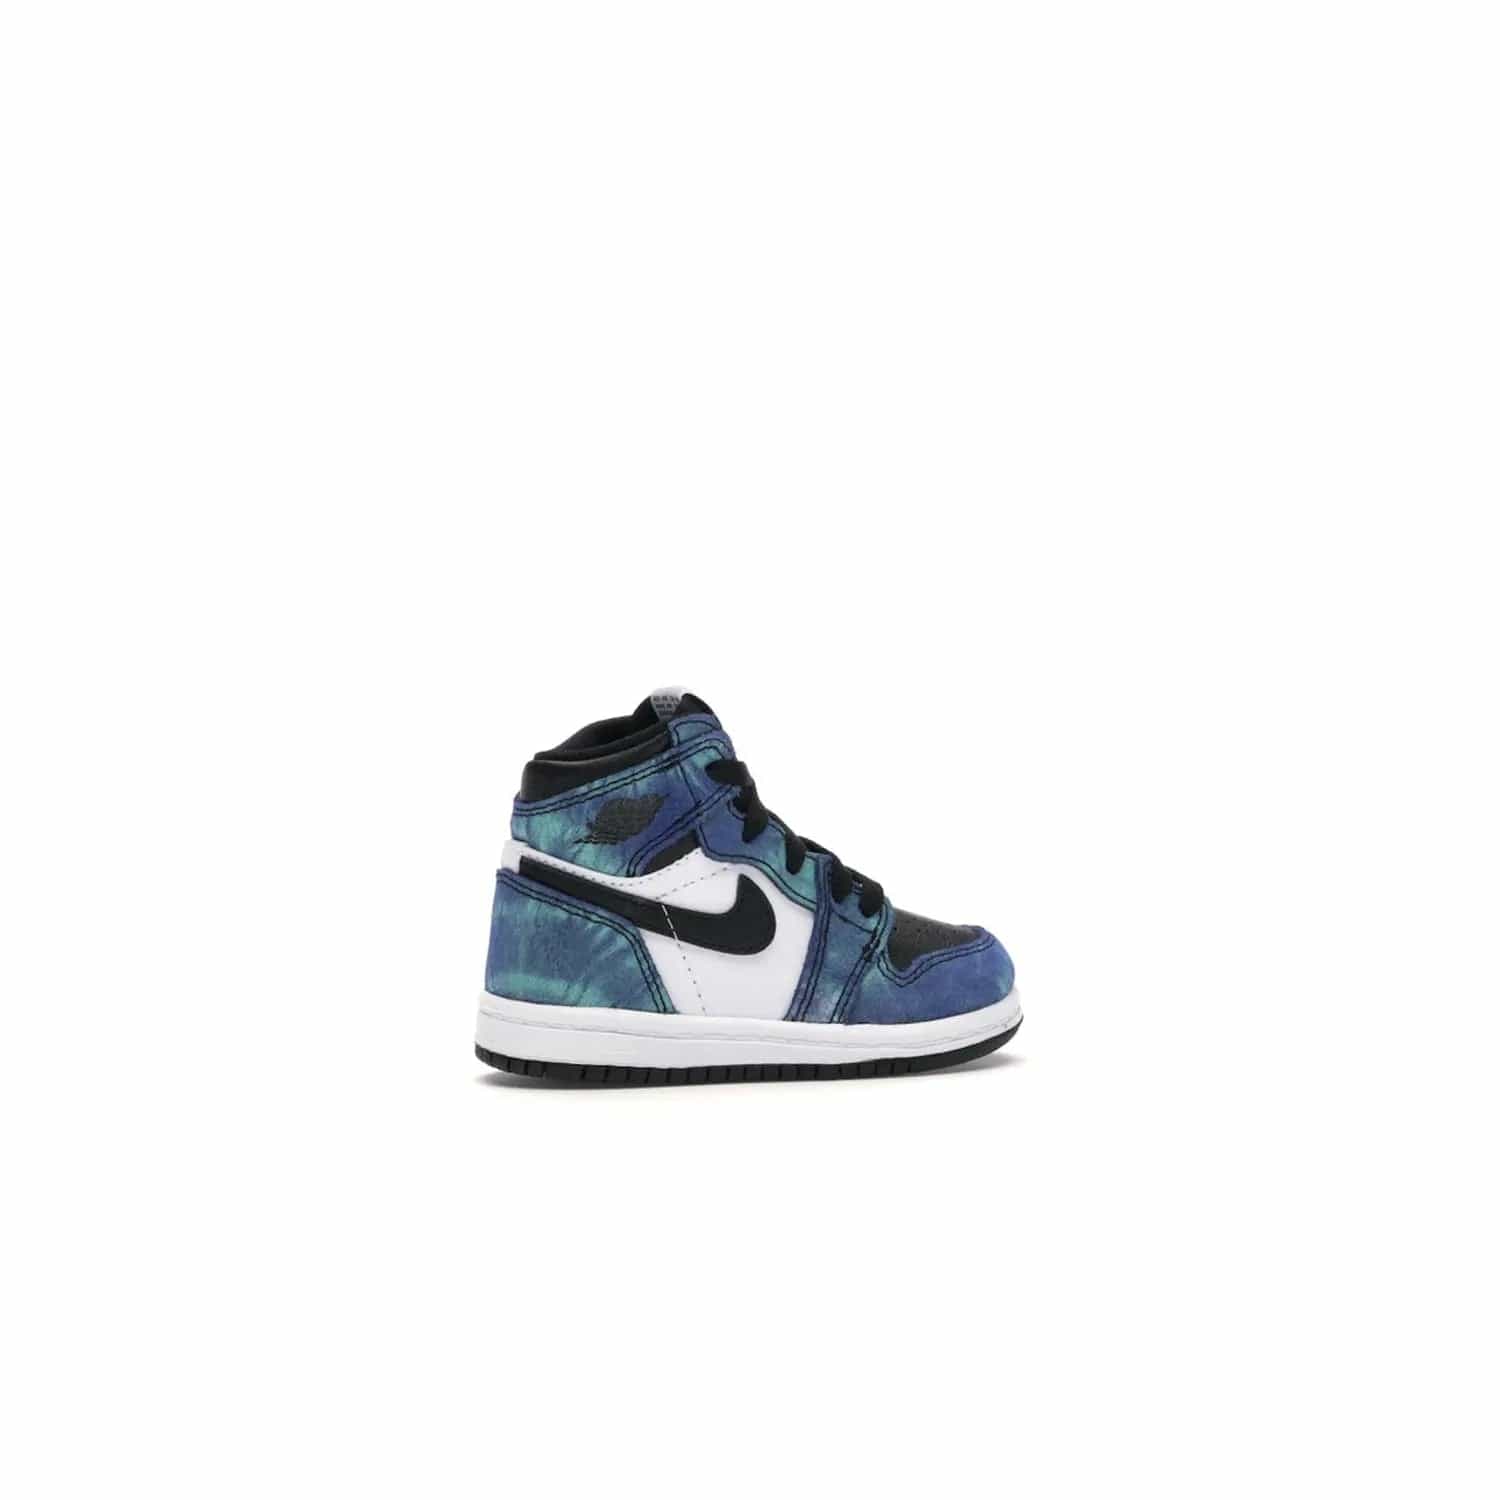 Jordan 1 Retro High Tie Dye (TD) - Image 35 - Only at www.BallersClubKickz.com - Add a unique twist to your sneaker collection with the Jordan 1 Retro High Tie Dye (TD). Classic Air Jordan 1 details like toe box perforations and the signature Swoosh logo on the sidewall are topped with an eye-catching tie dye design that’s perfect for styling all year round.